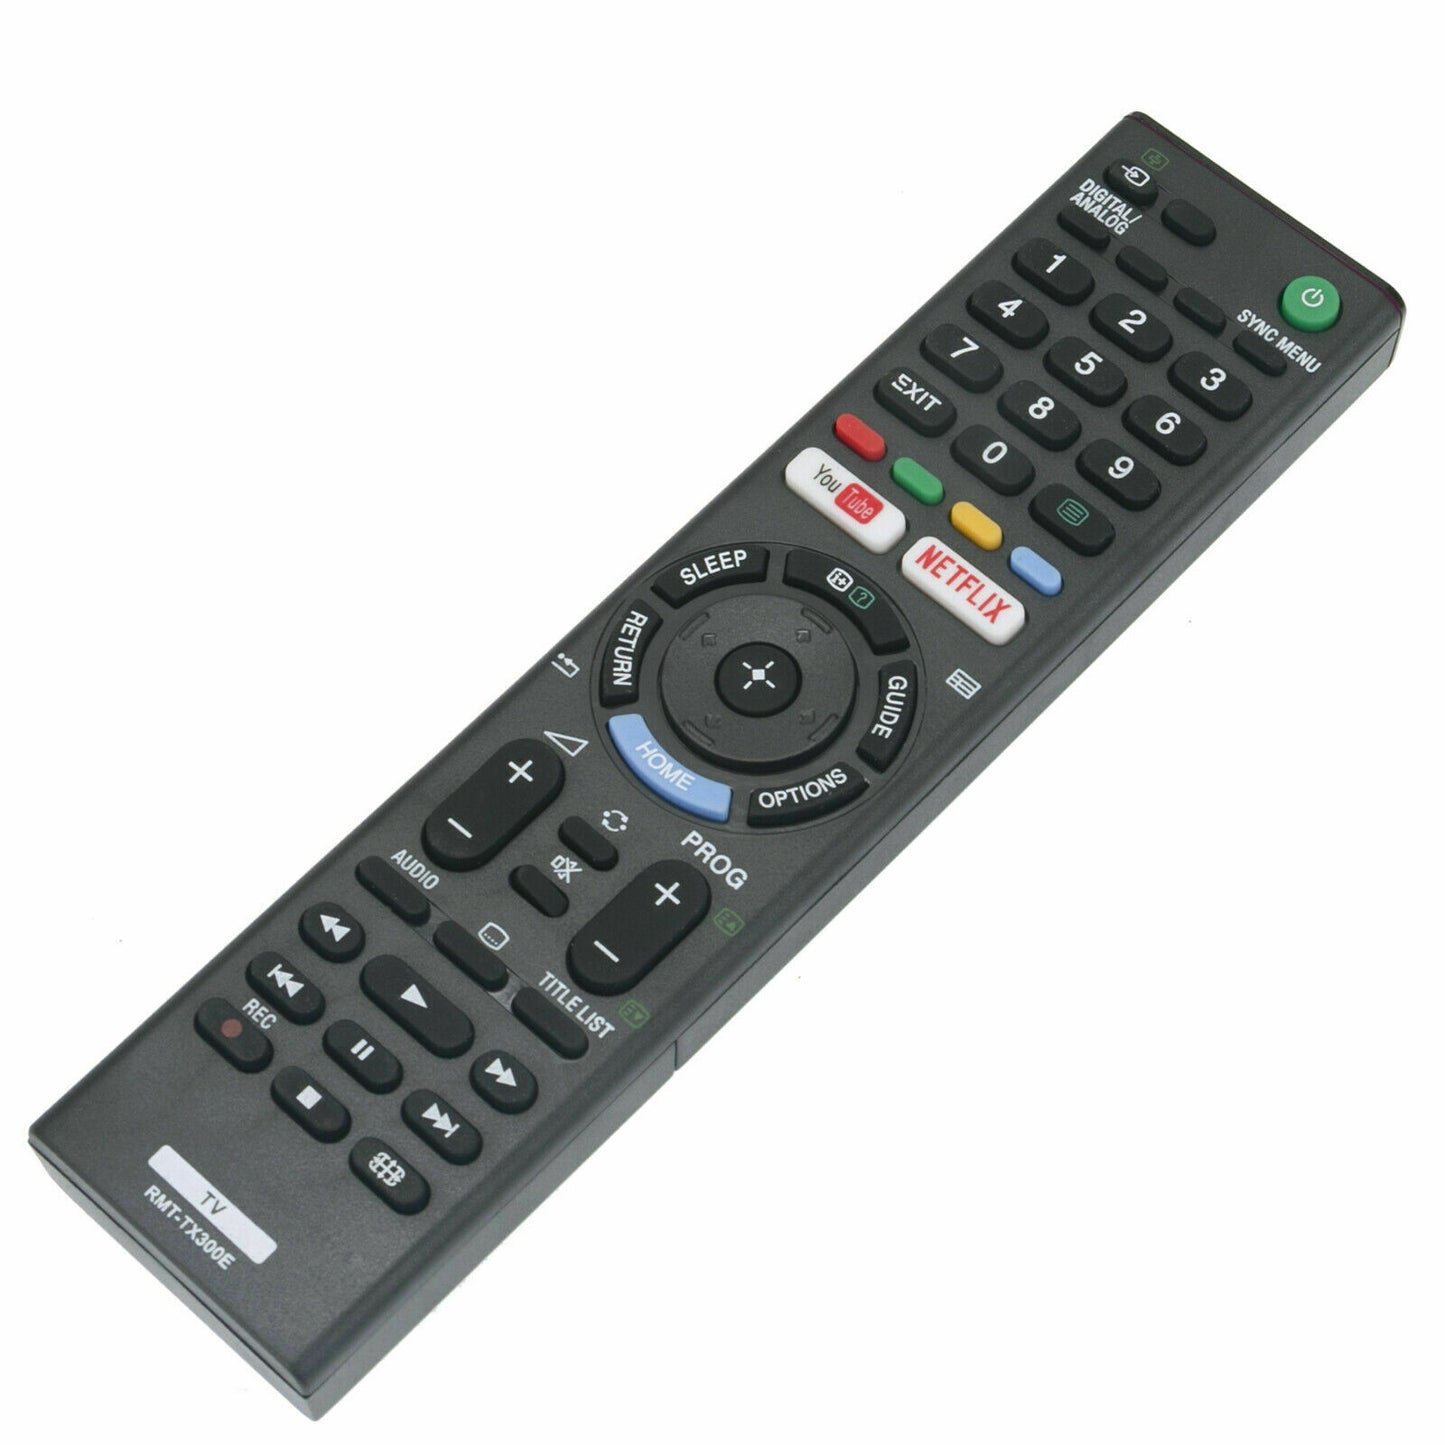 Replacement Remote Control for SONY BRAVIA TV Model KD-49XE7002